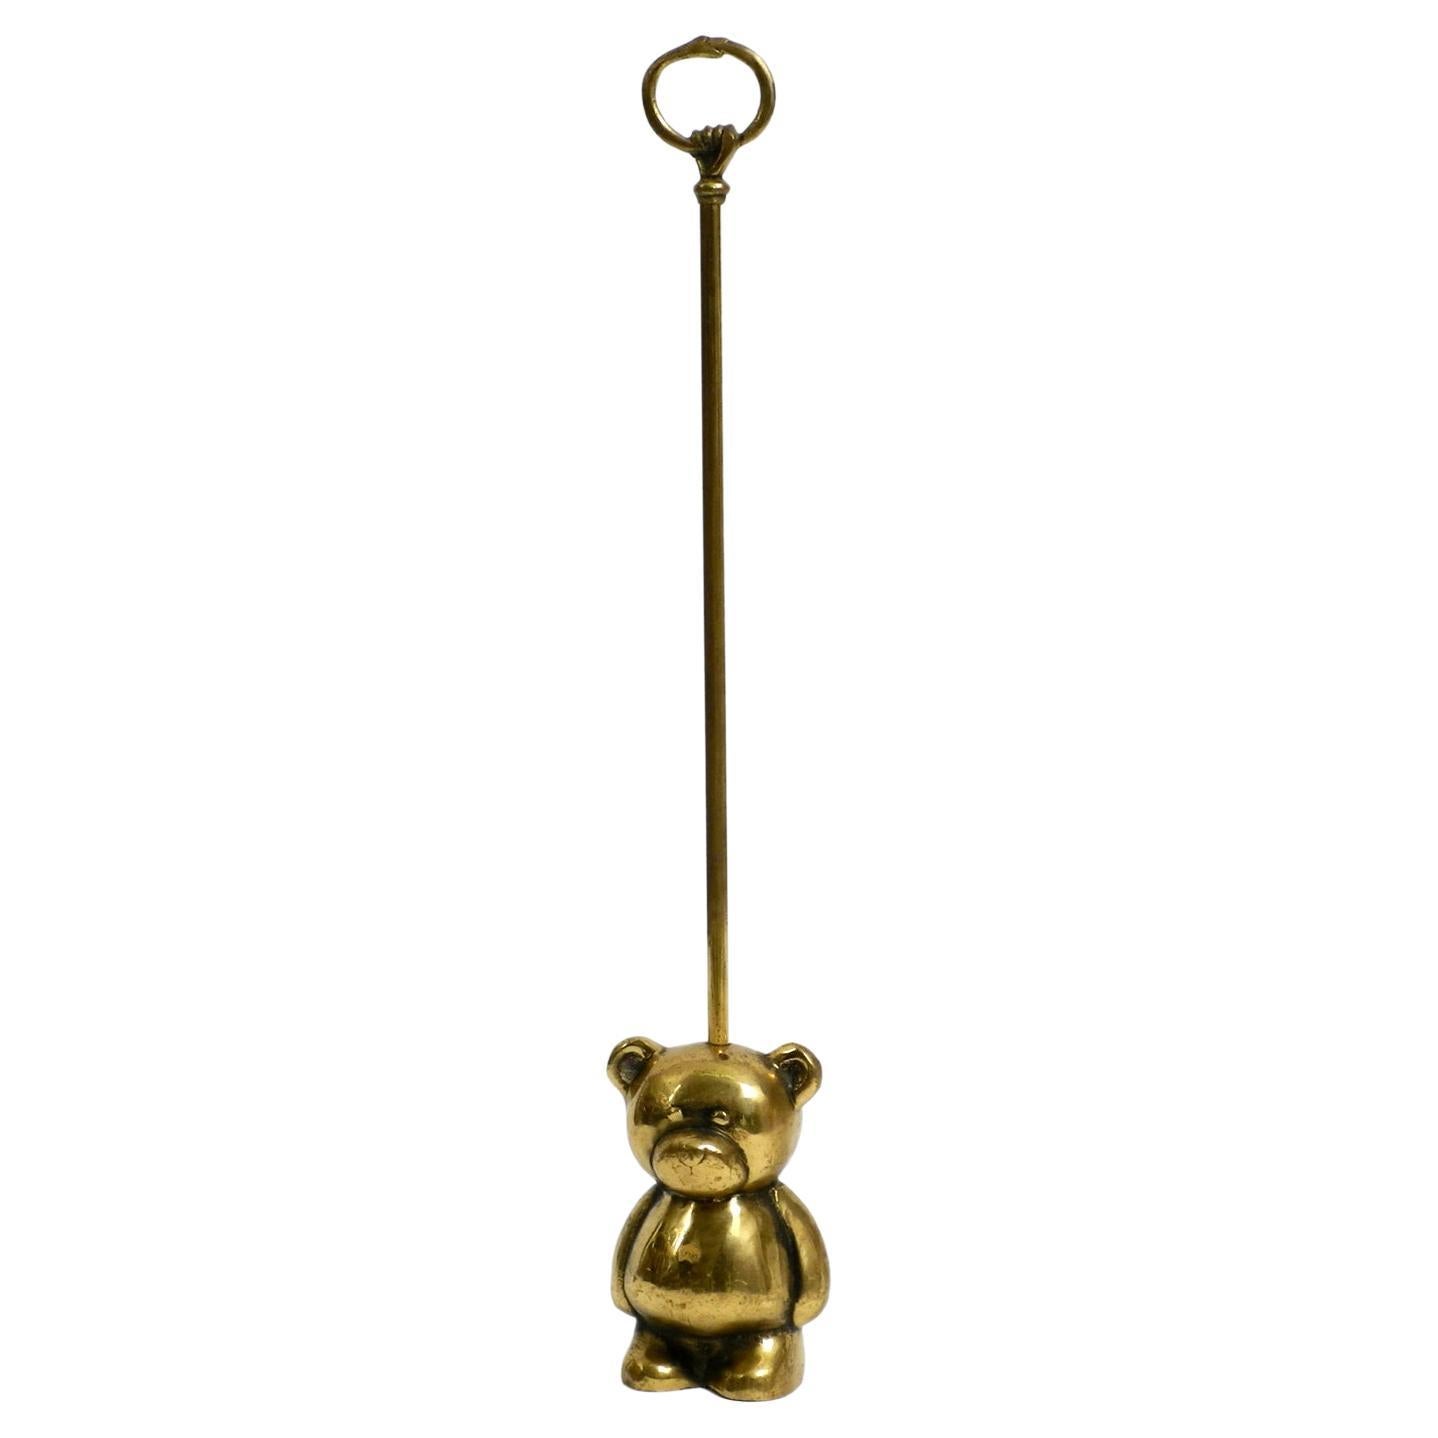 Very Heavy Solid Brass Doorstop from the 1960s in the Shape of a Cute Teddy Bear